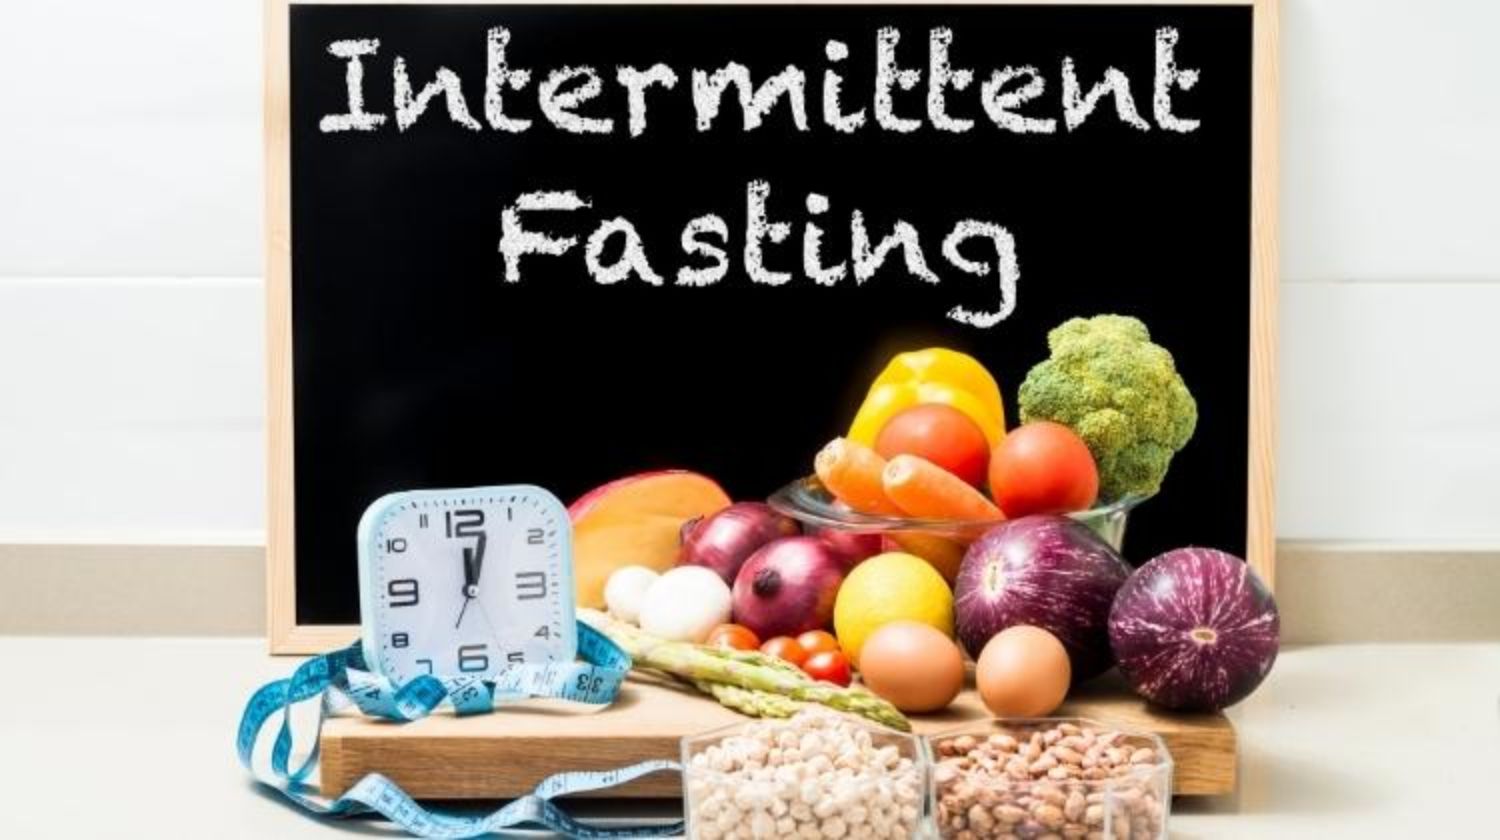 how many calories to eat during intermittent fasting 16 8